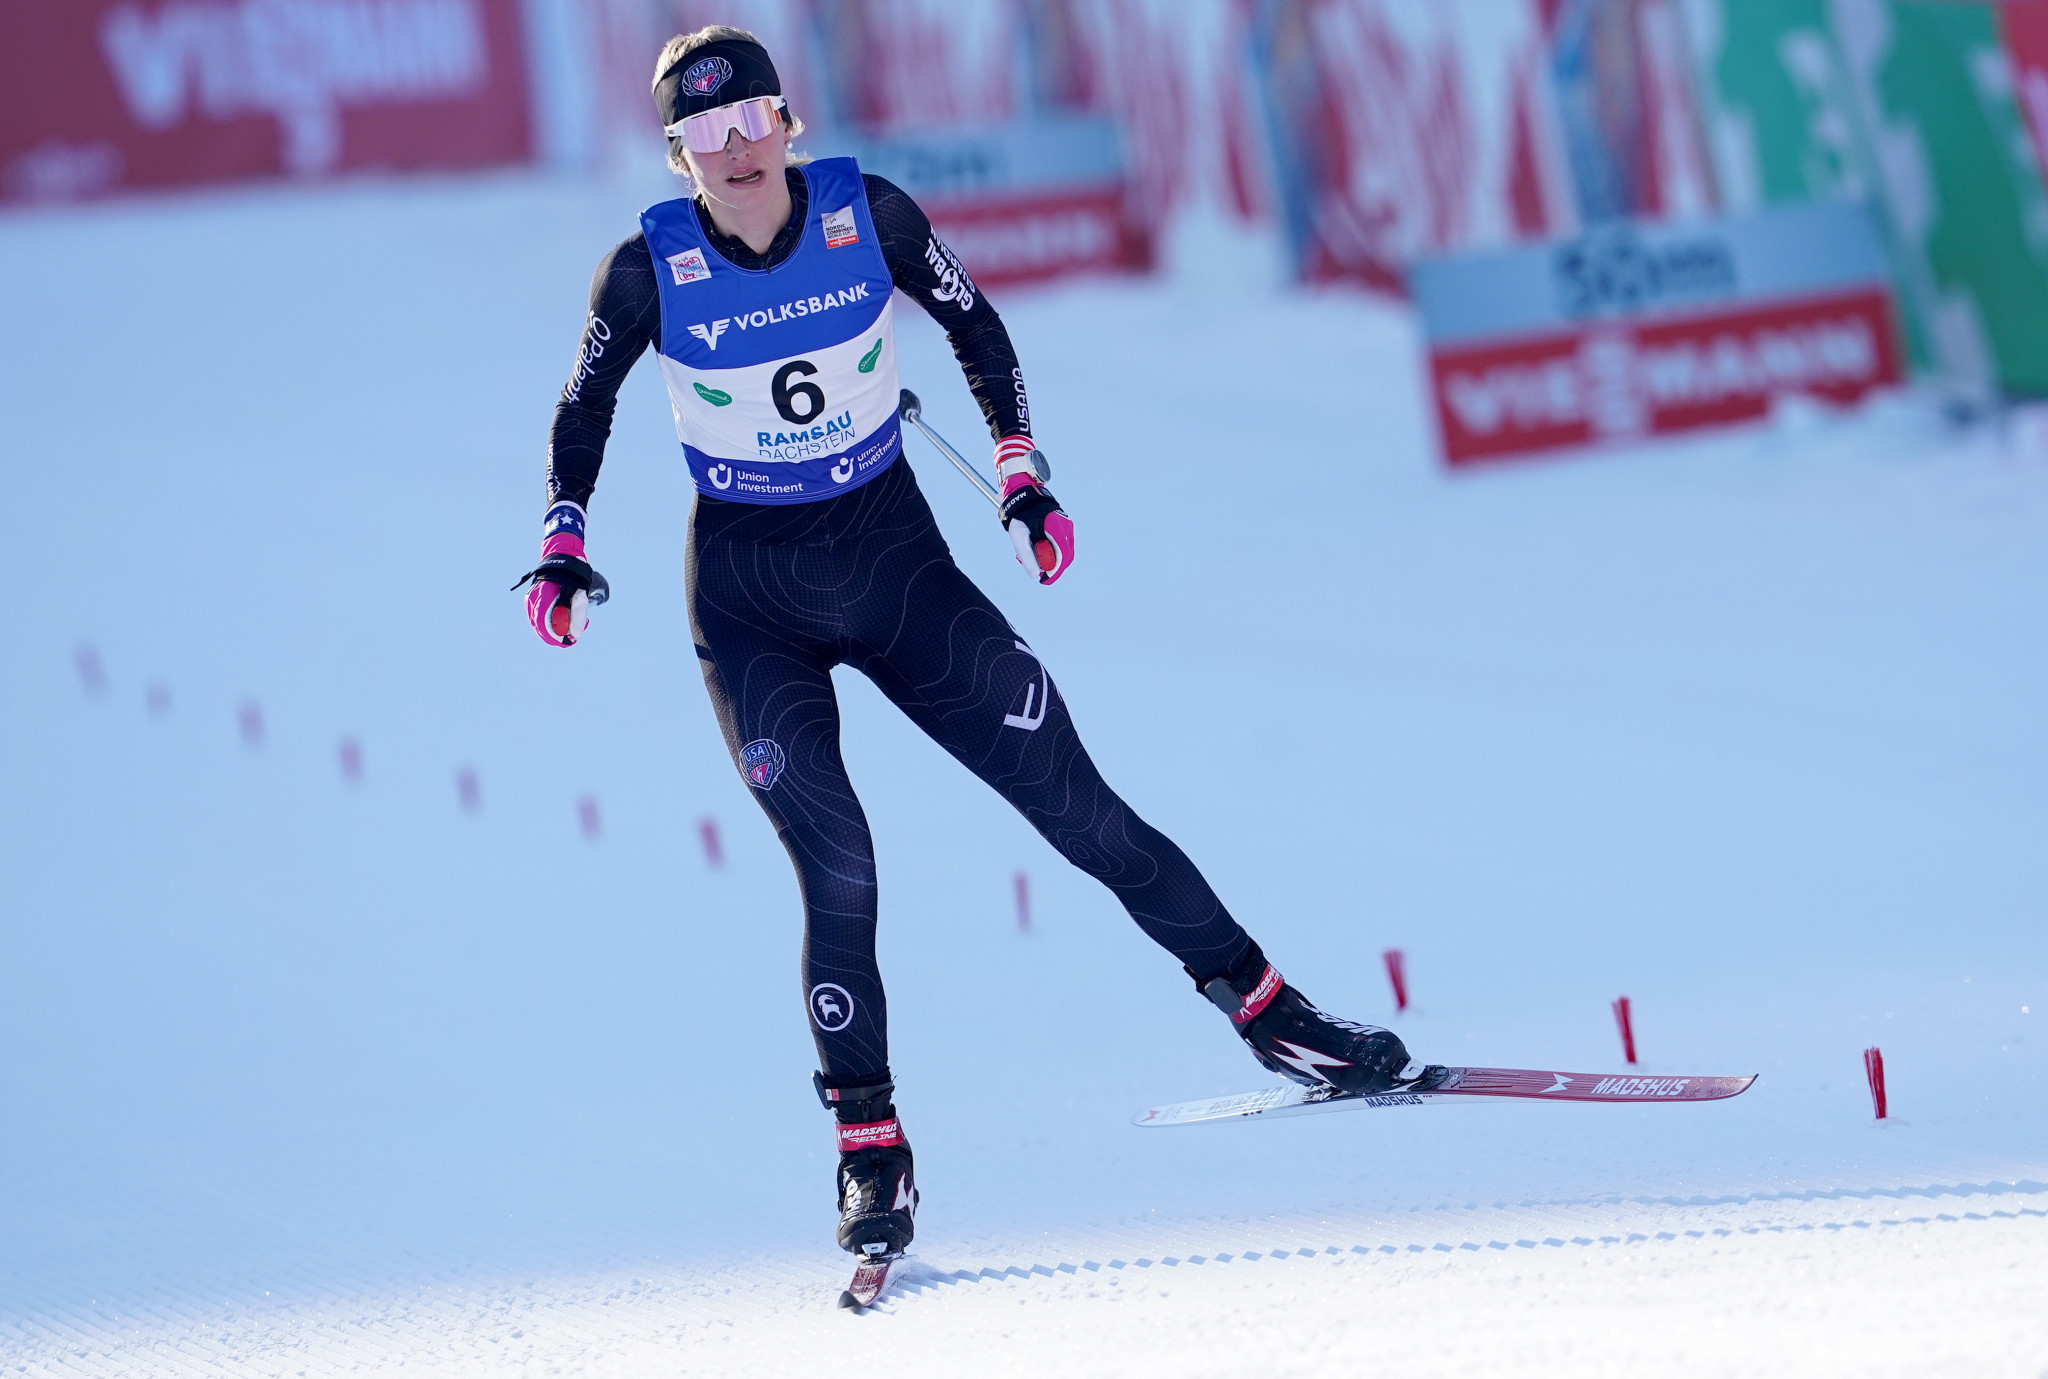 Geraghty-Moats wins inaugural FIS Women's Nordic Combined World Cup event